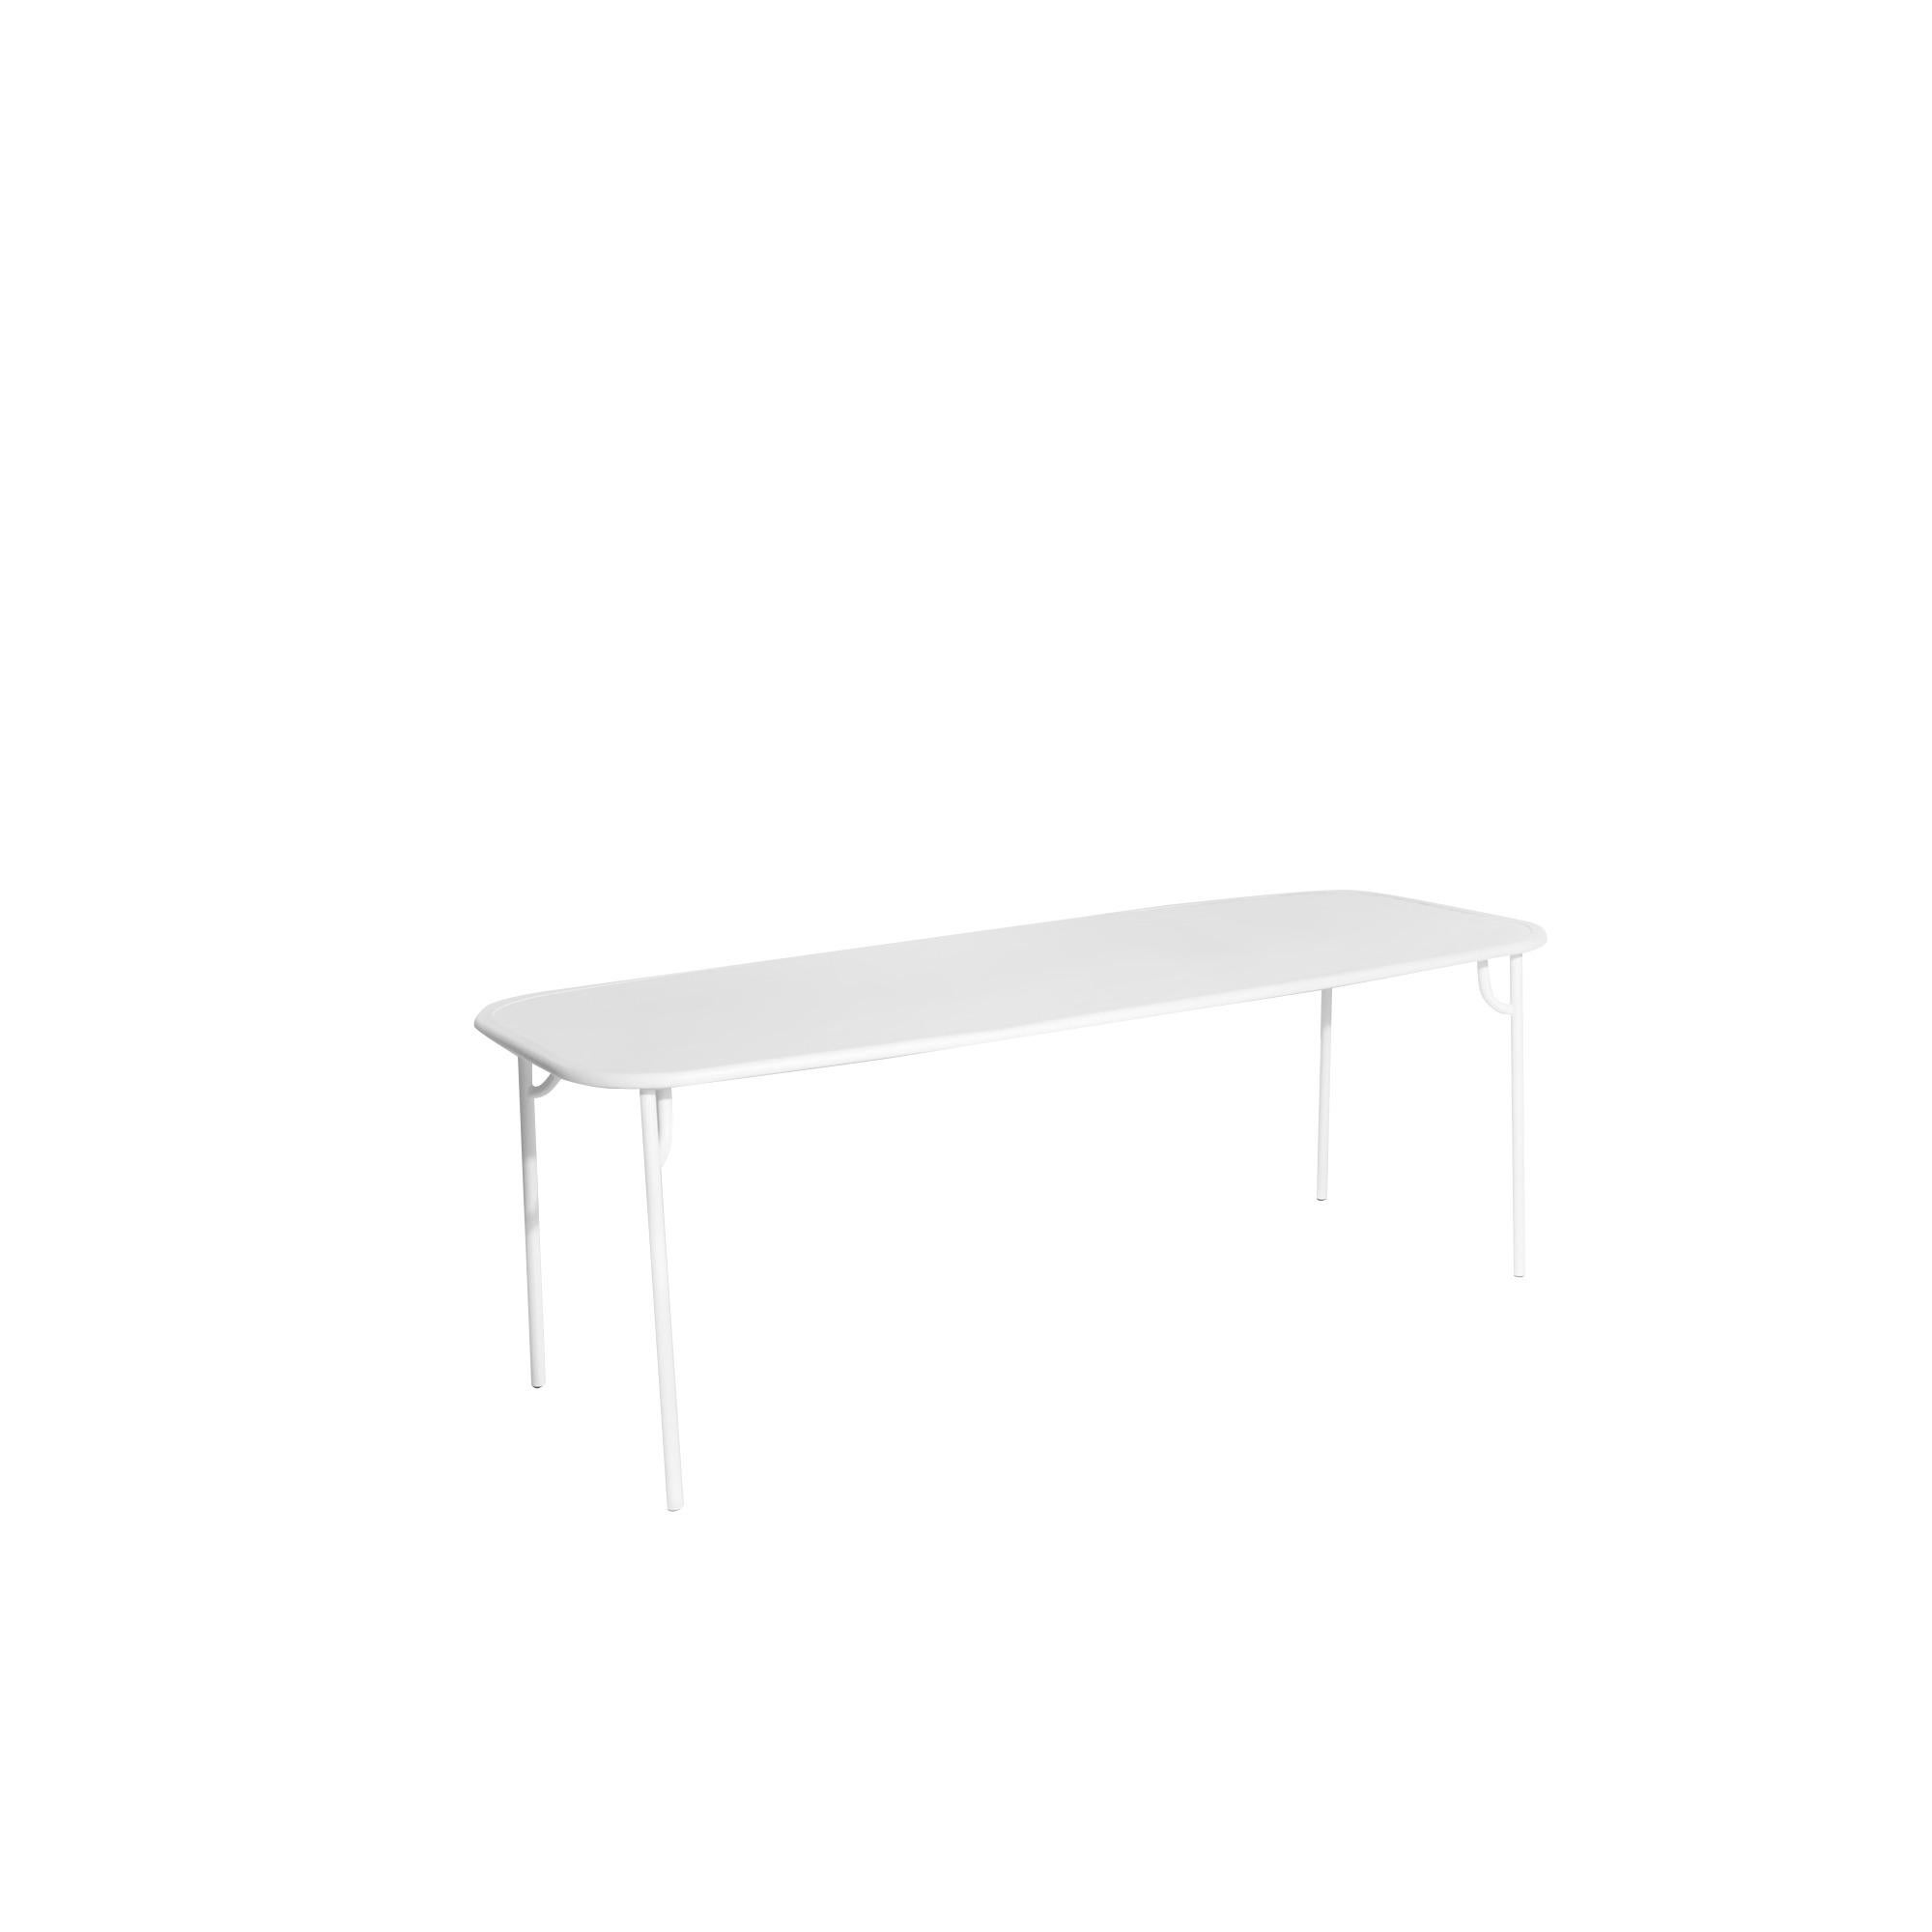 Petite Friture Week-End Large Plain Rectangular Dining Table in White Aluminium by Studio BrichetZiegler, 2017

The week-end collection is a full range of outdoor furniture, in aluminium grained epoxy paint, matt finish, that includes 18 functions